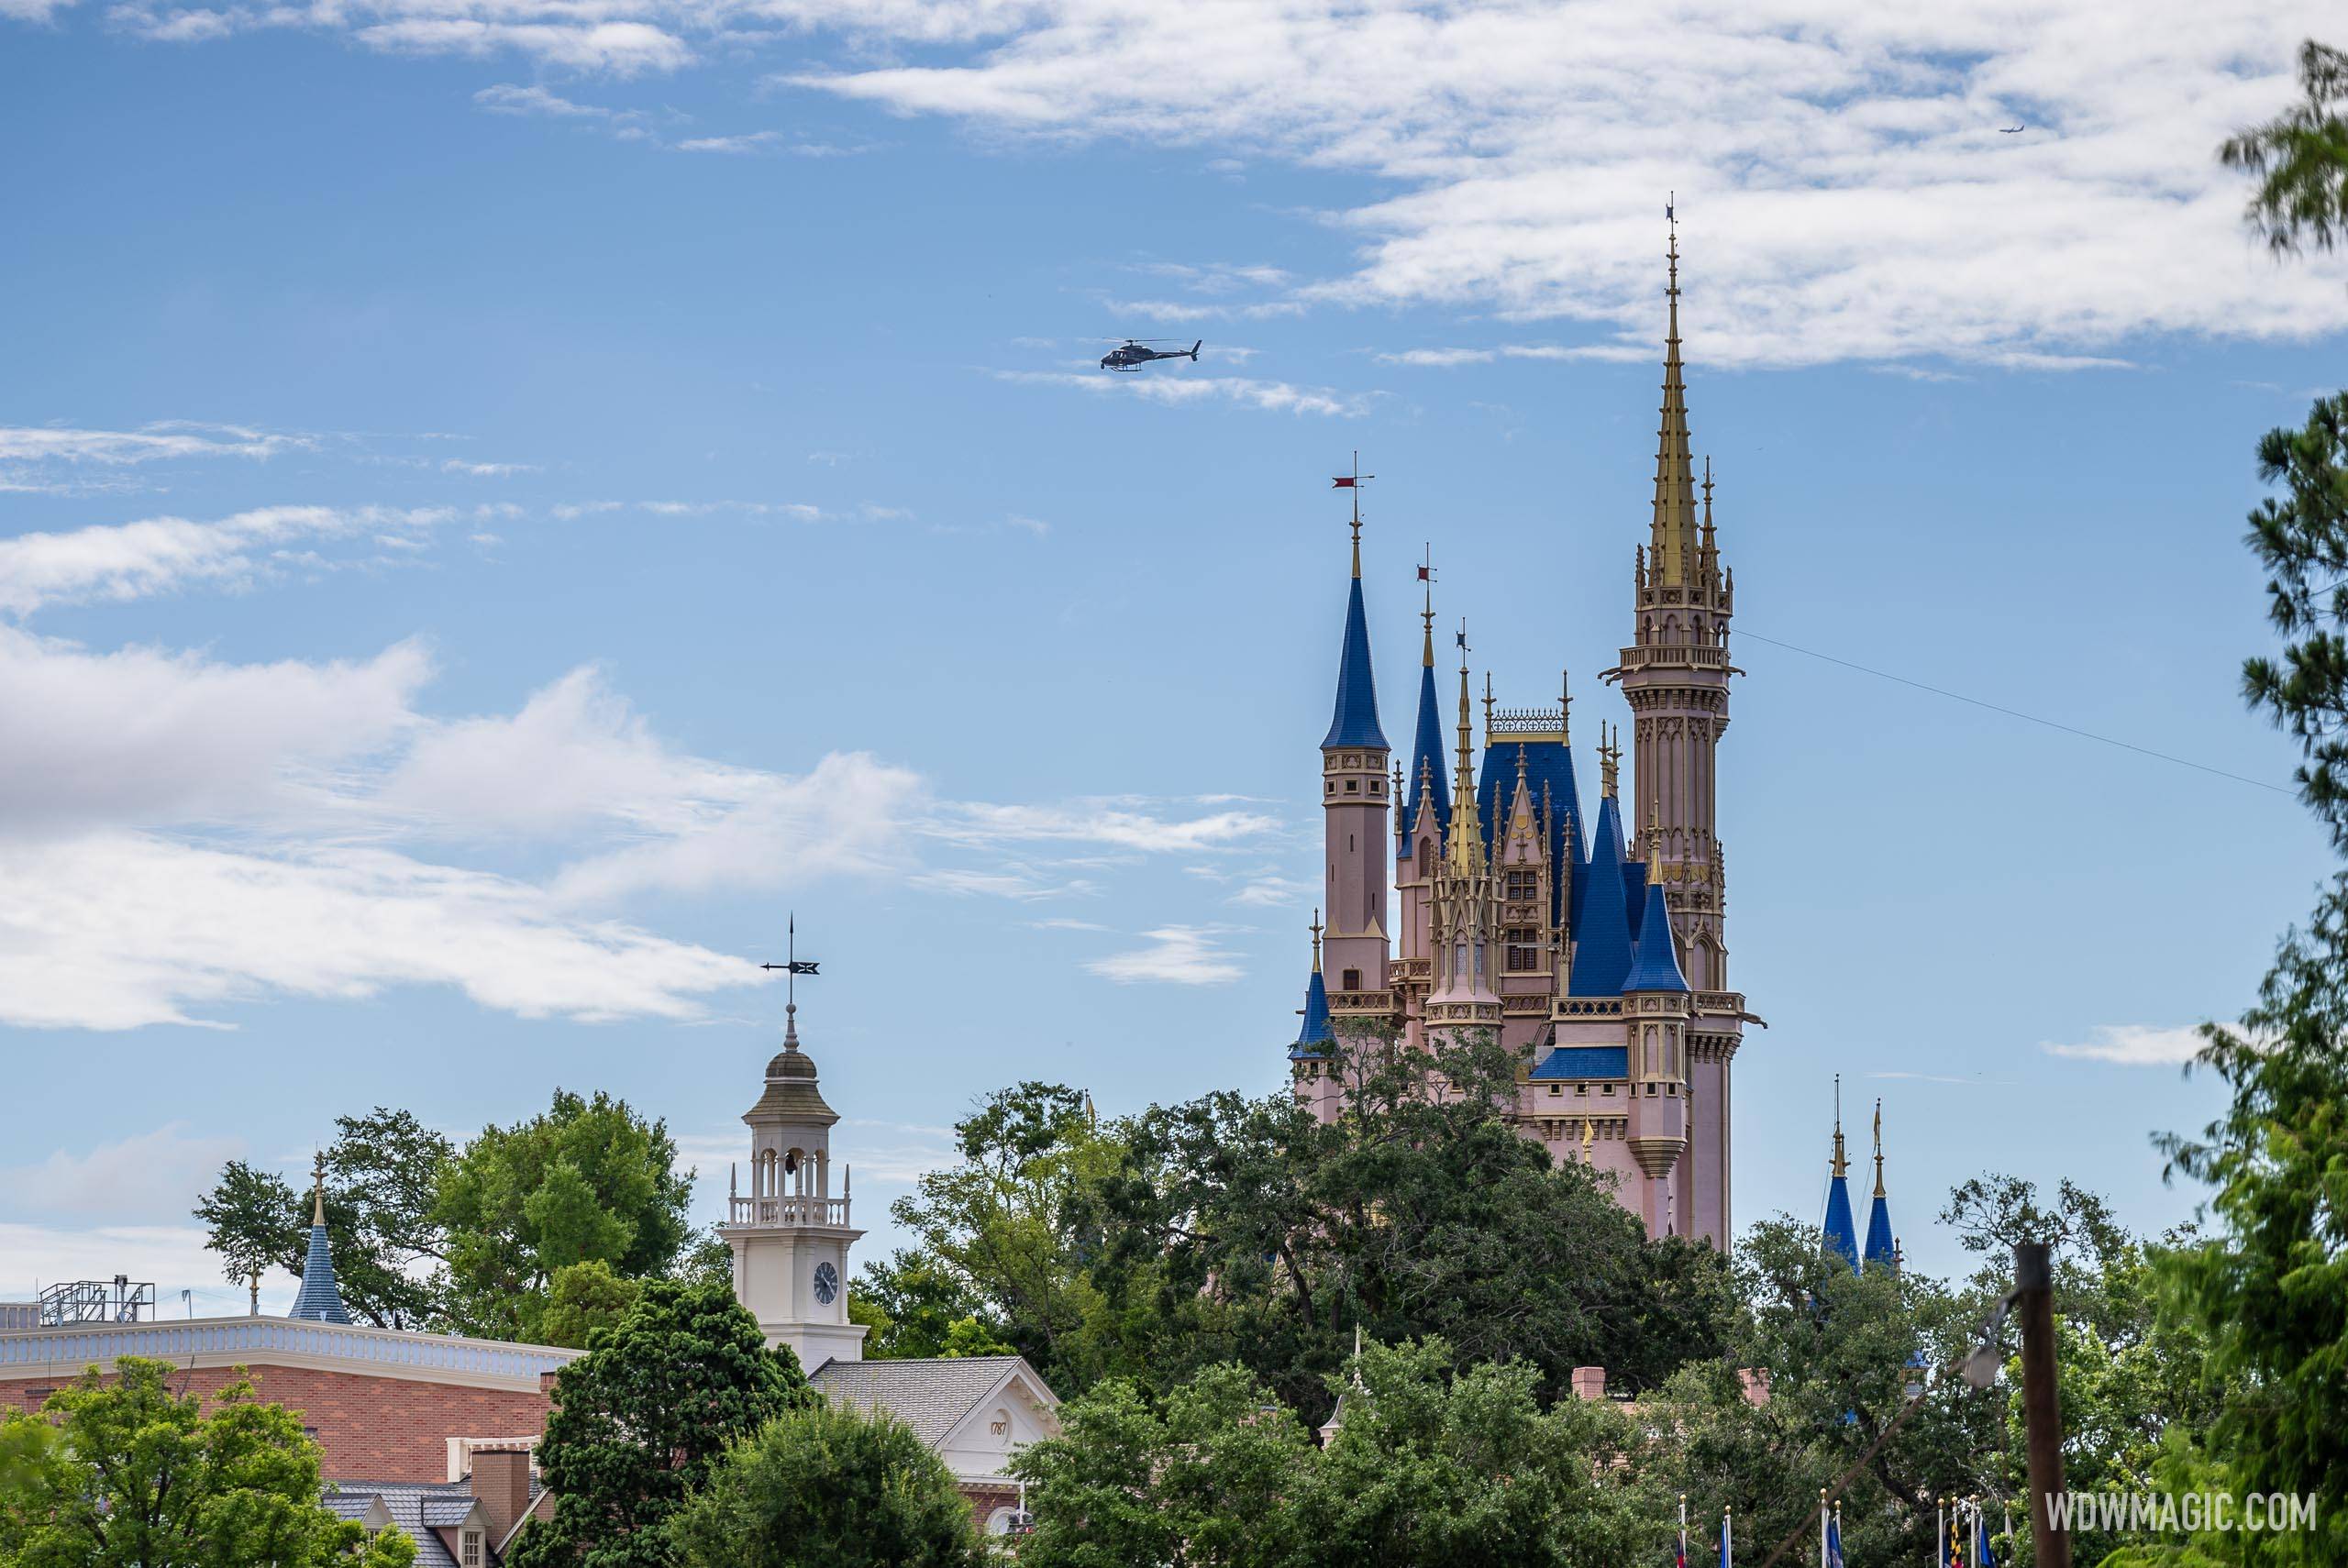 Disney Helicopter Flies Over Magic Kingdom for Promo Shoot